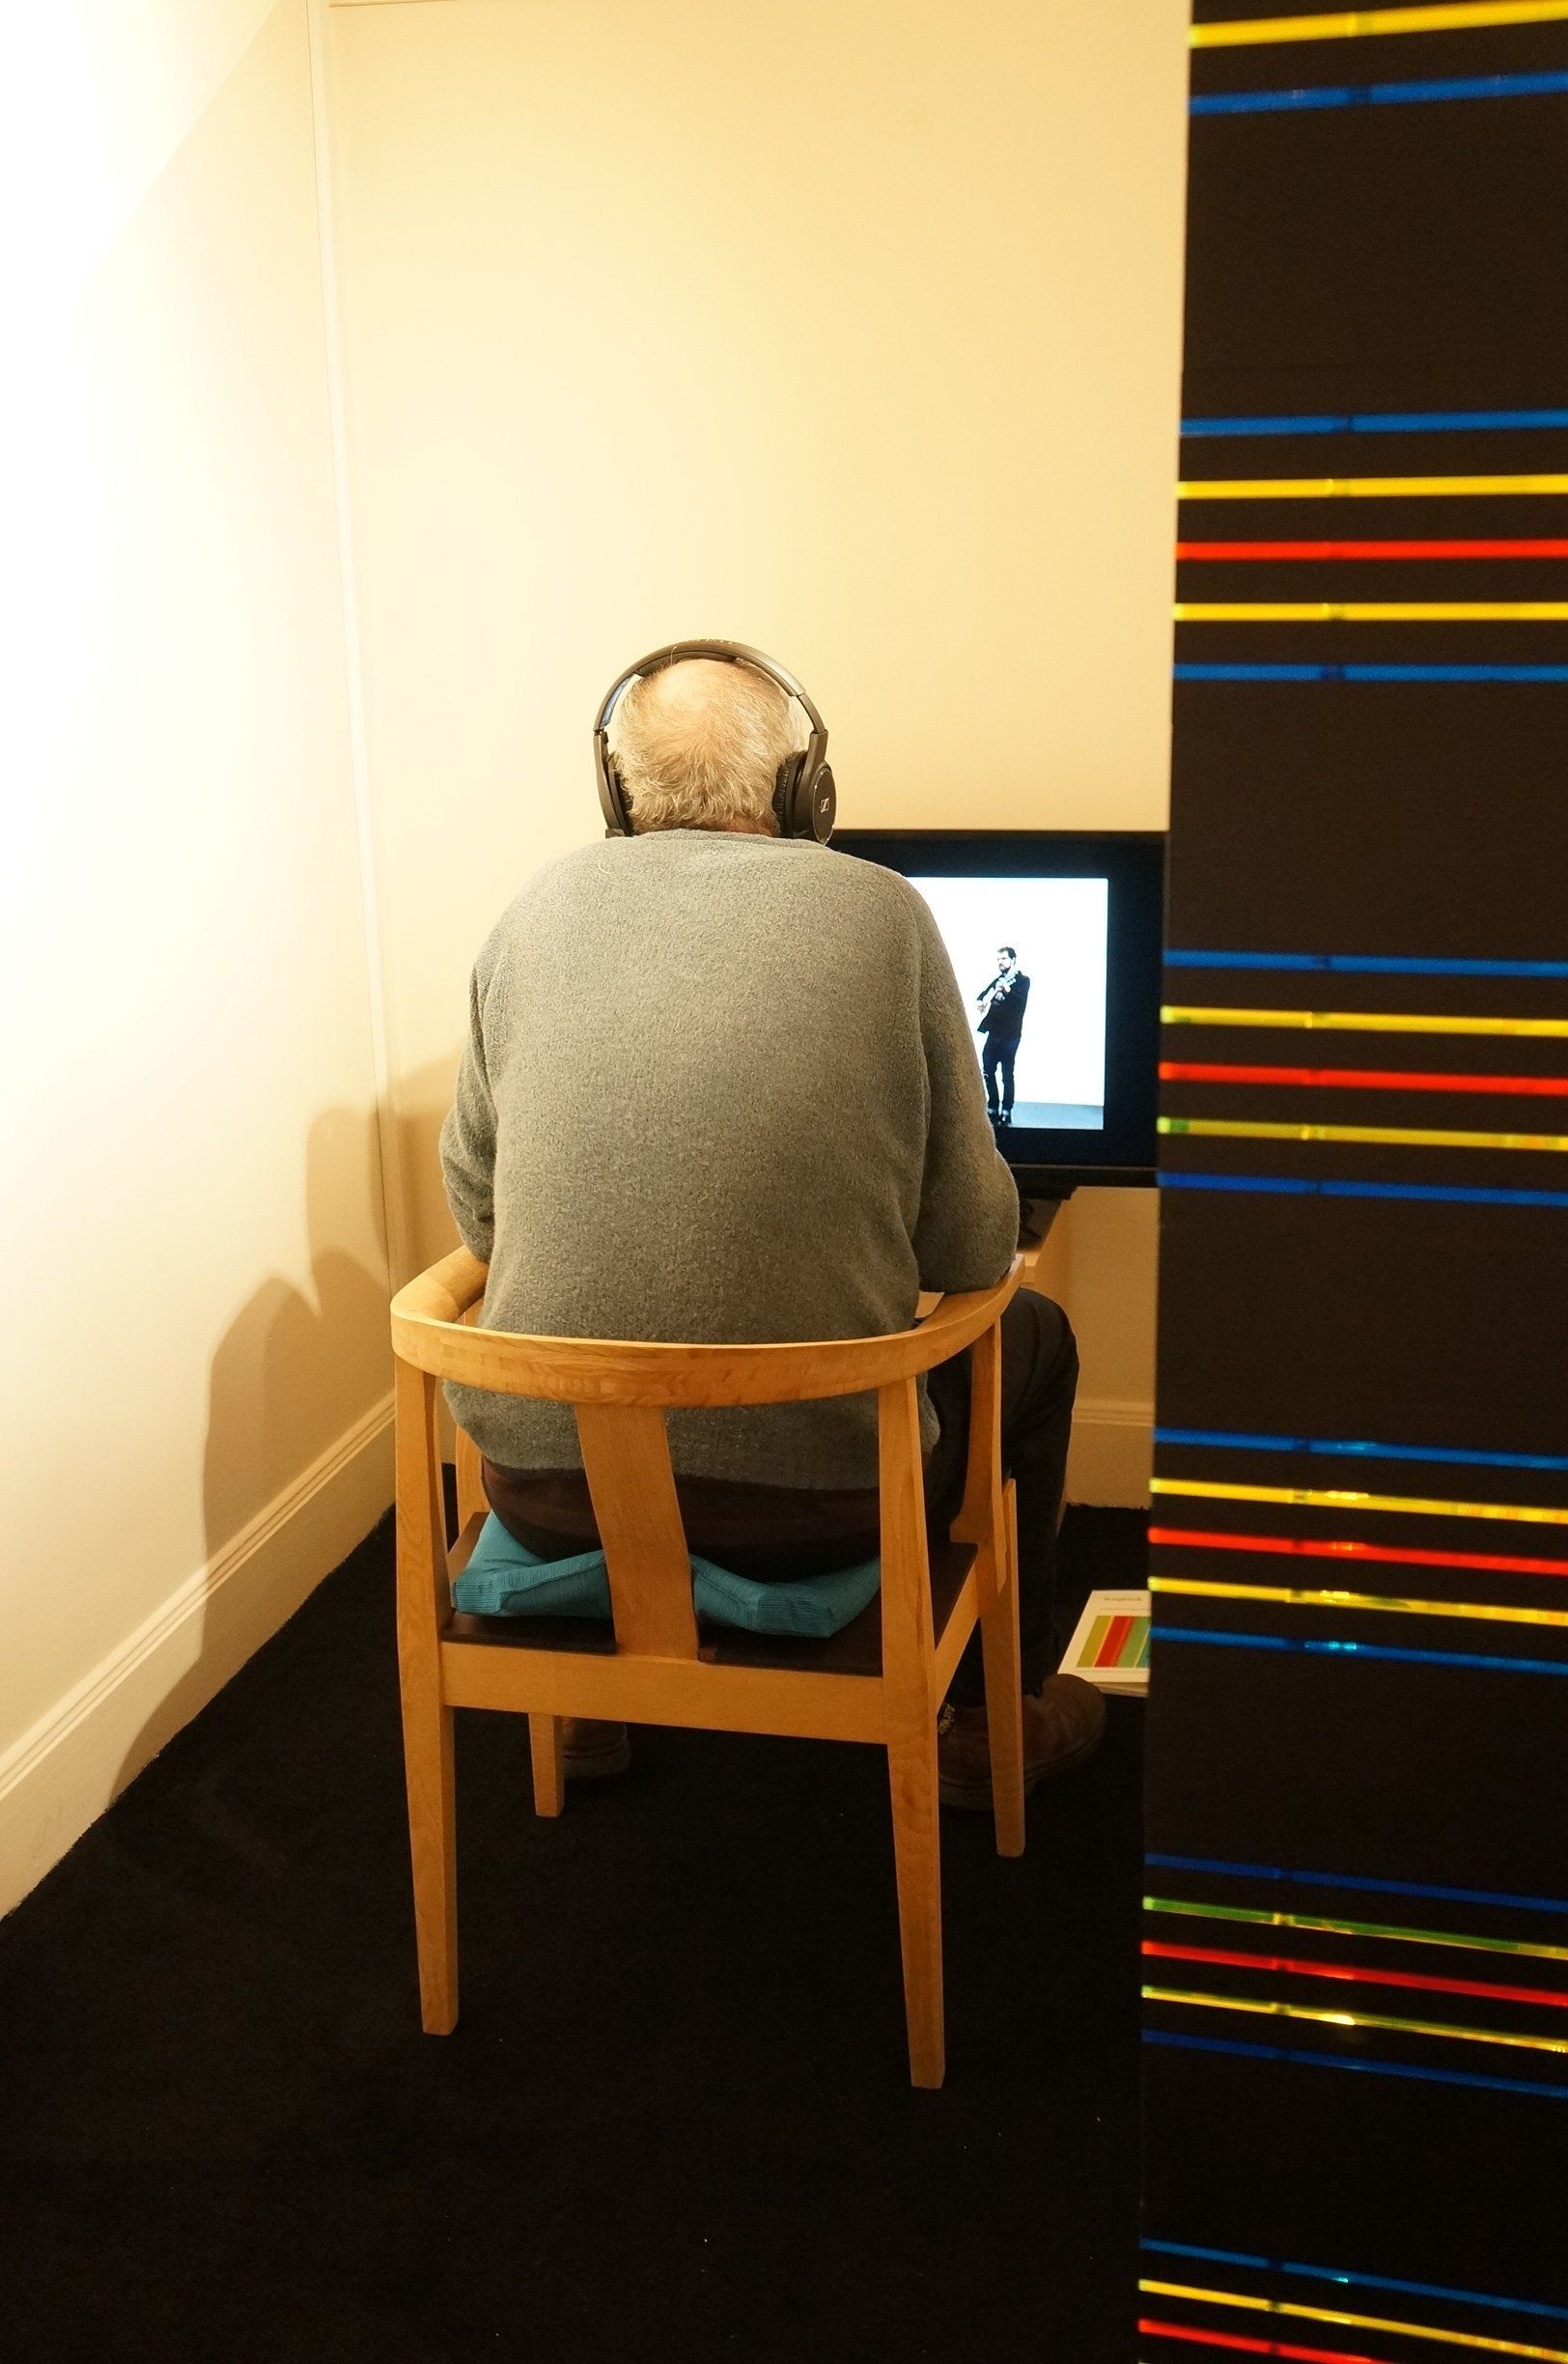 a man wearing headphones sits in a chair in front of a television